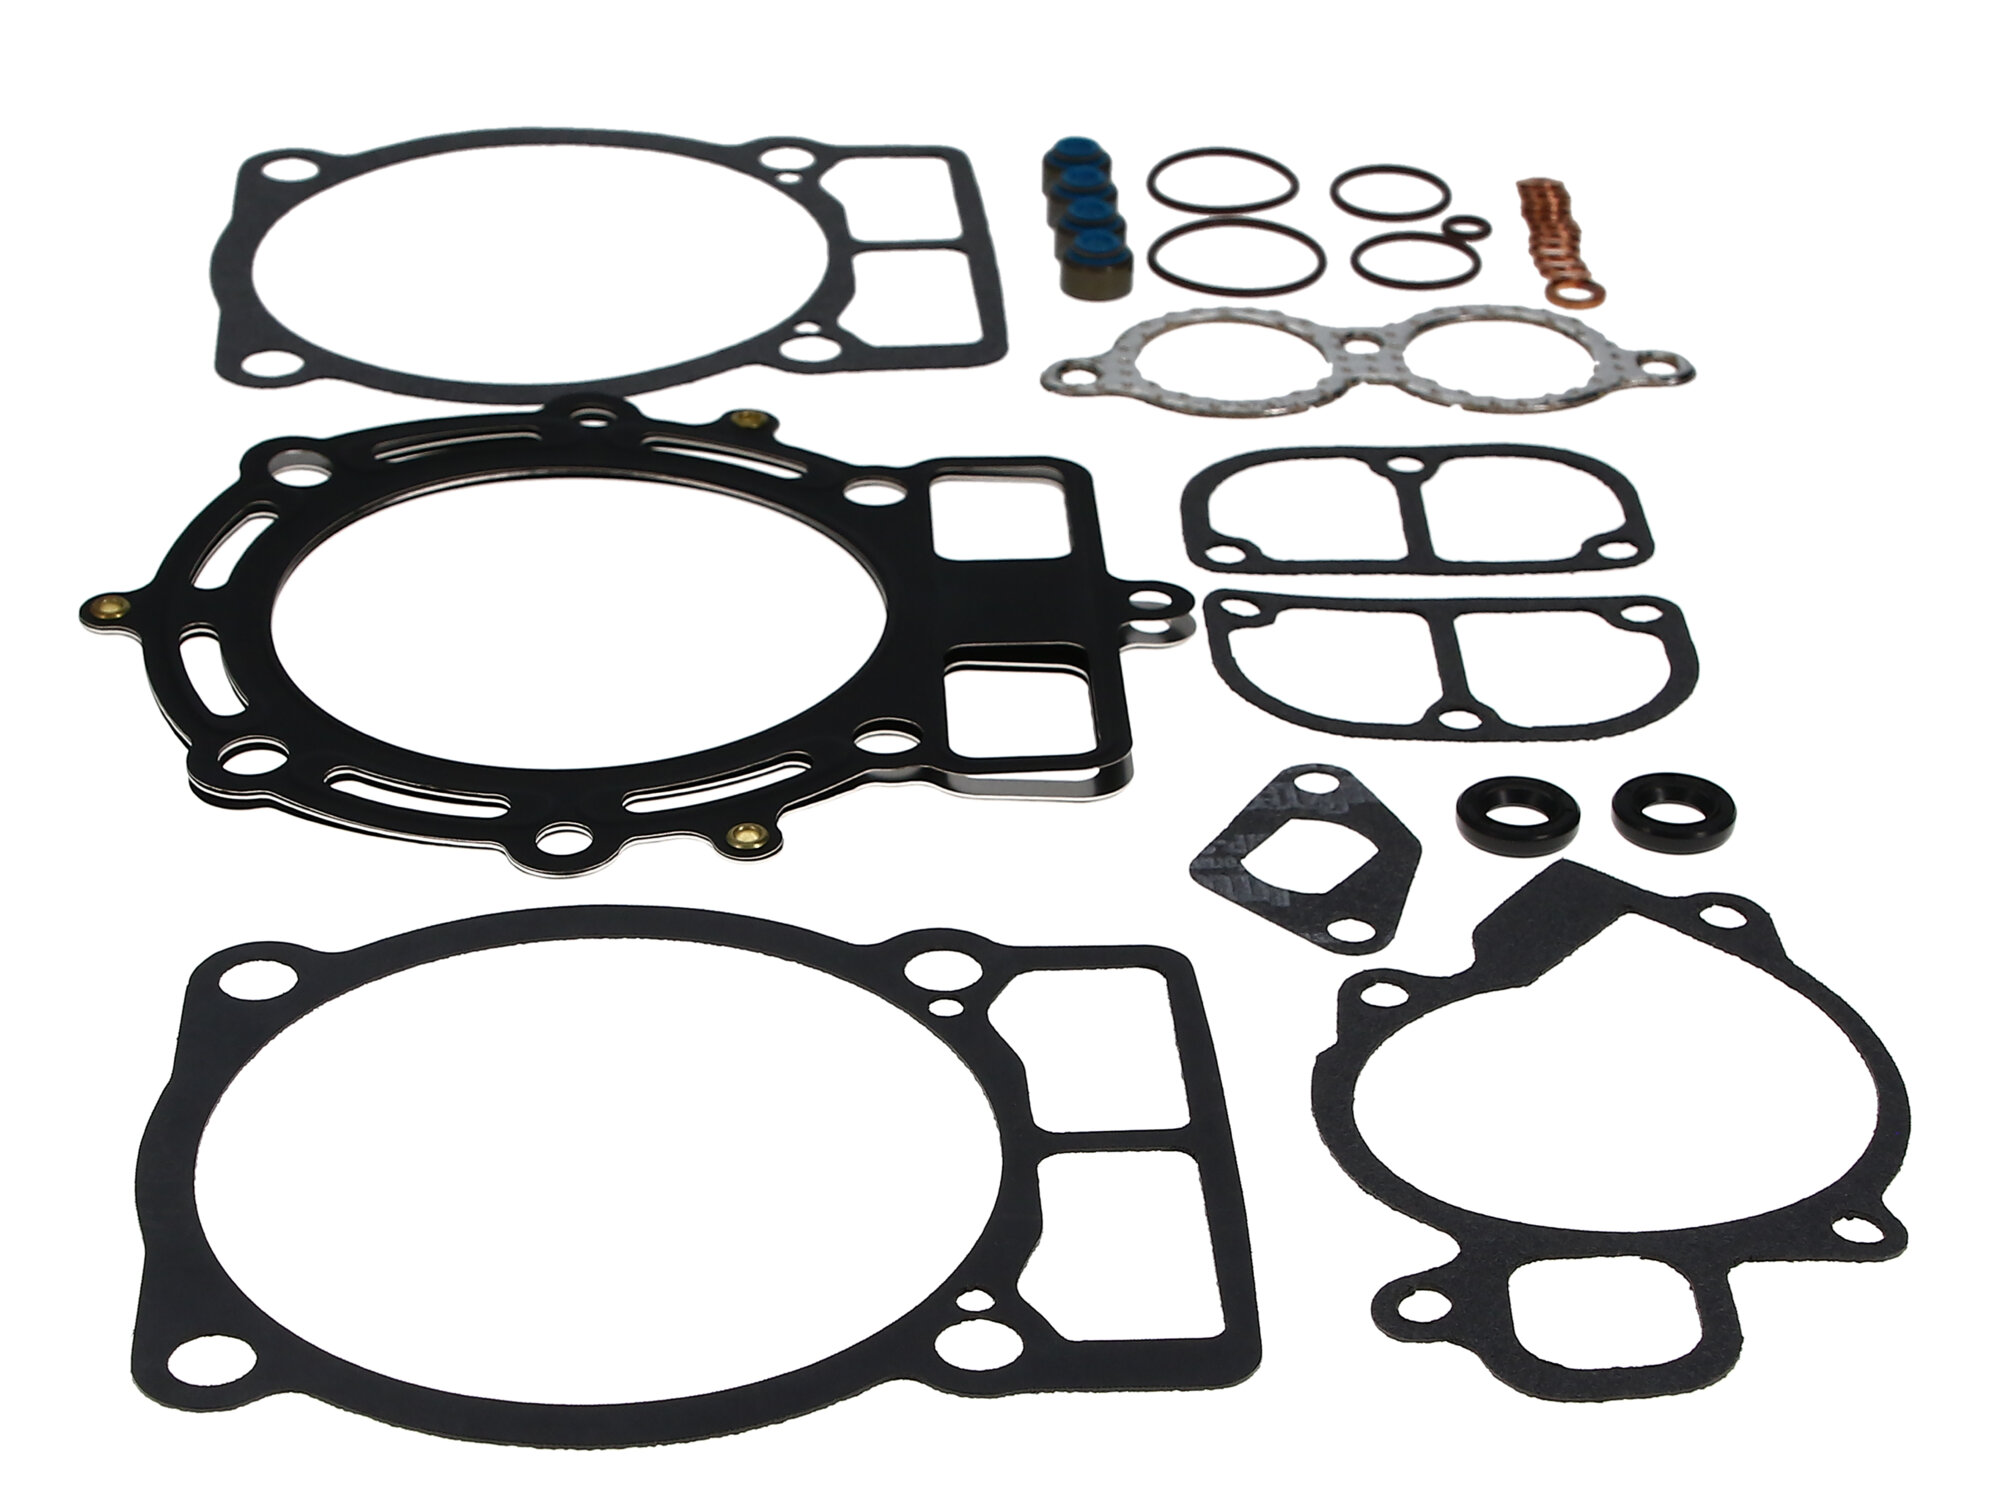 Shop High Quality Wiseco Top End Gasket Kit Top End Gasket Kits - Wiseco  SKU W5280